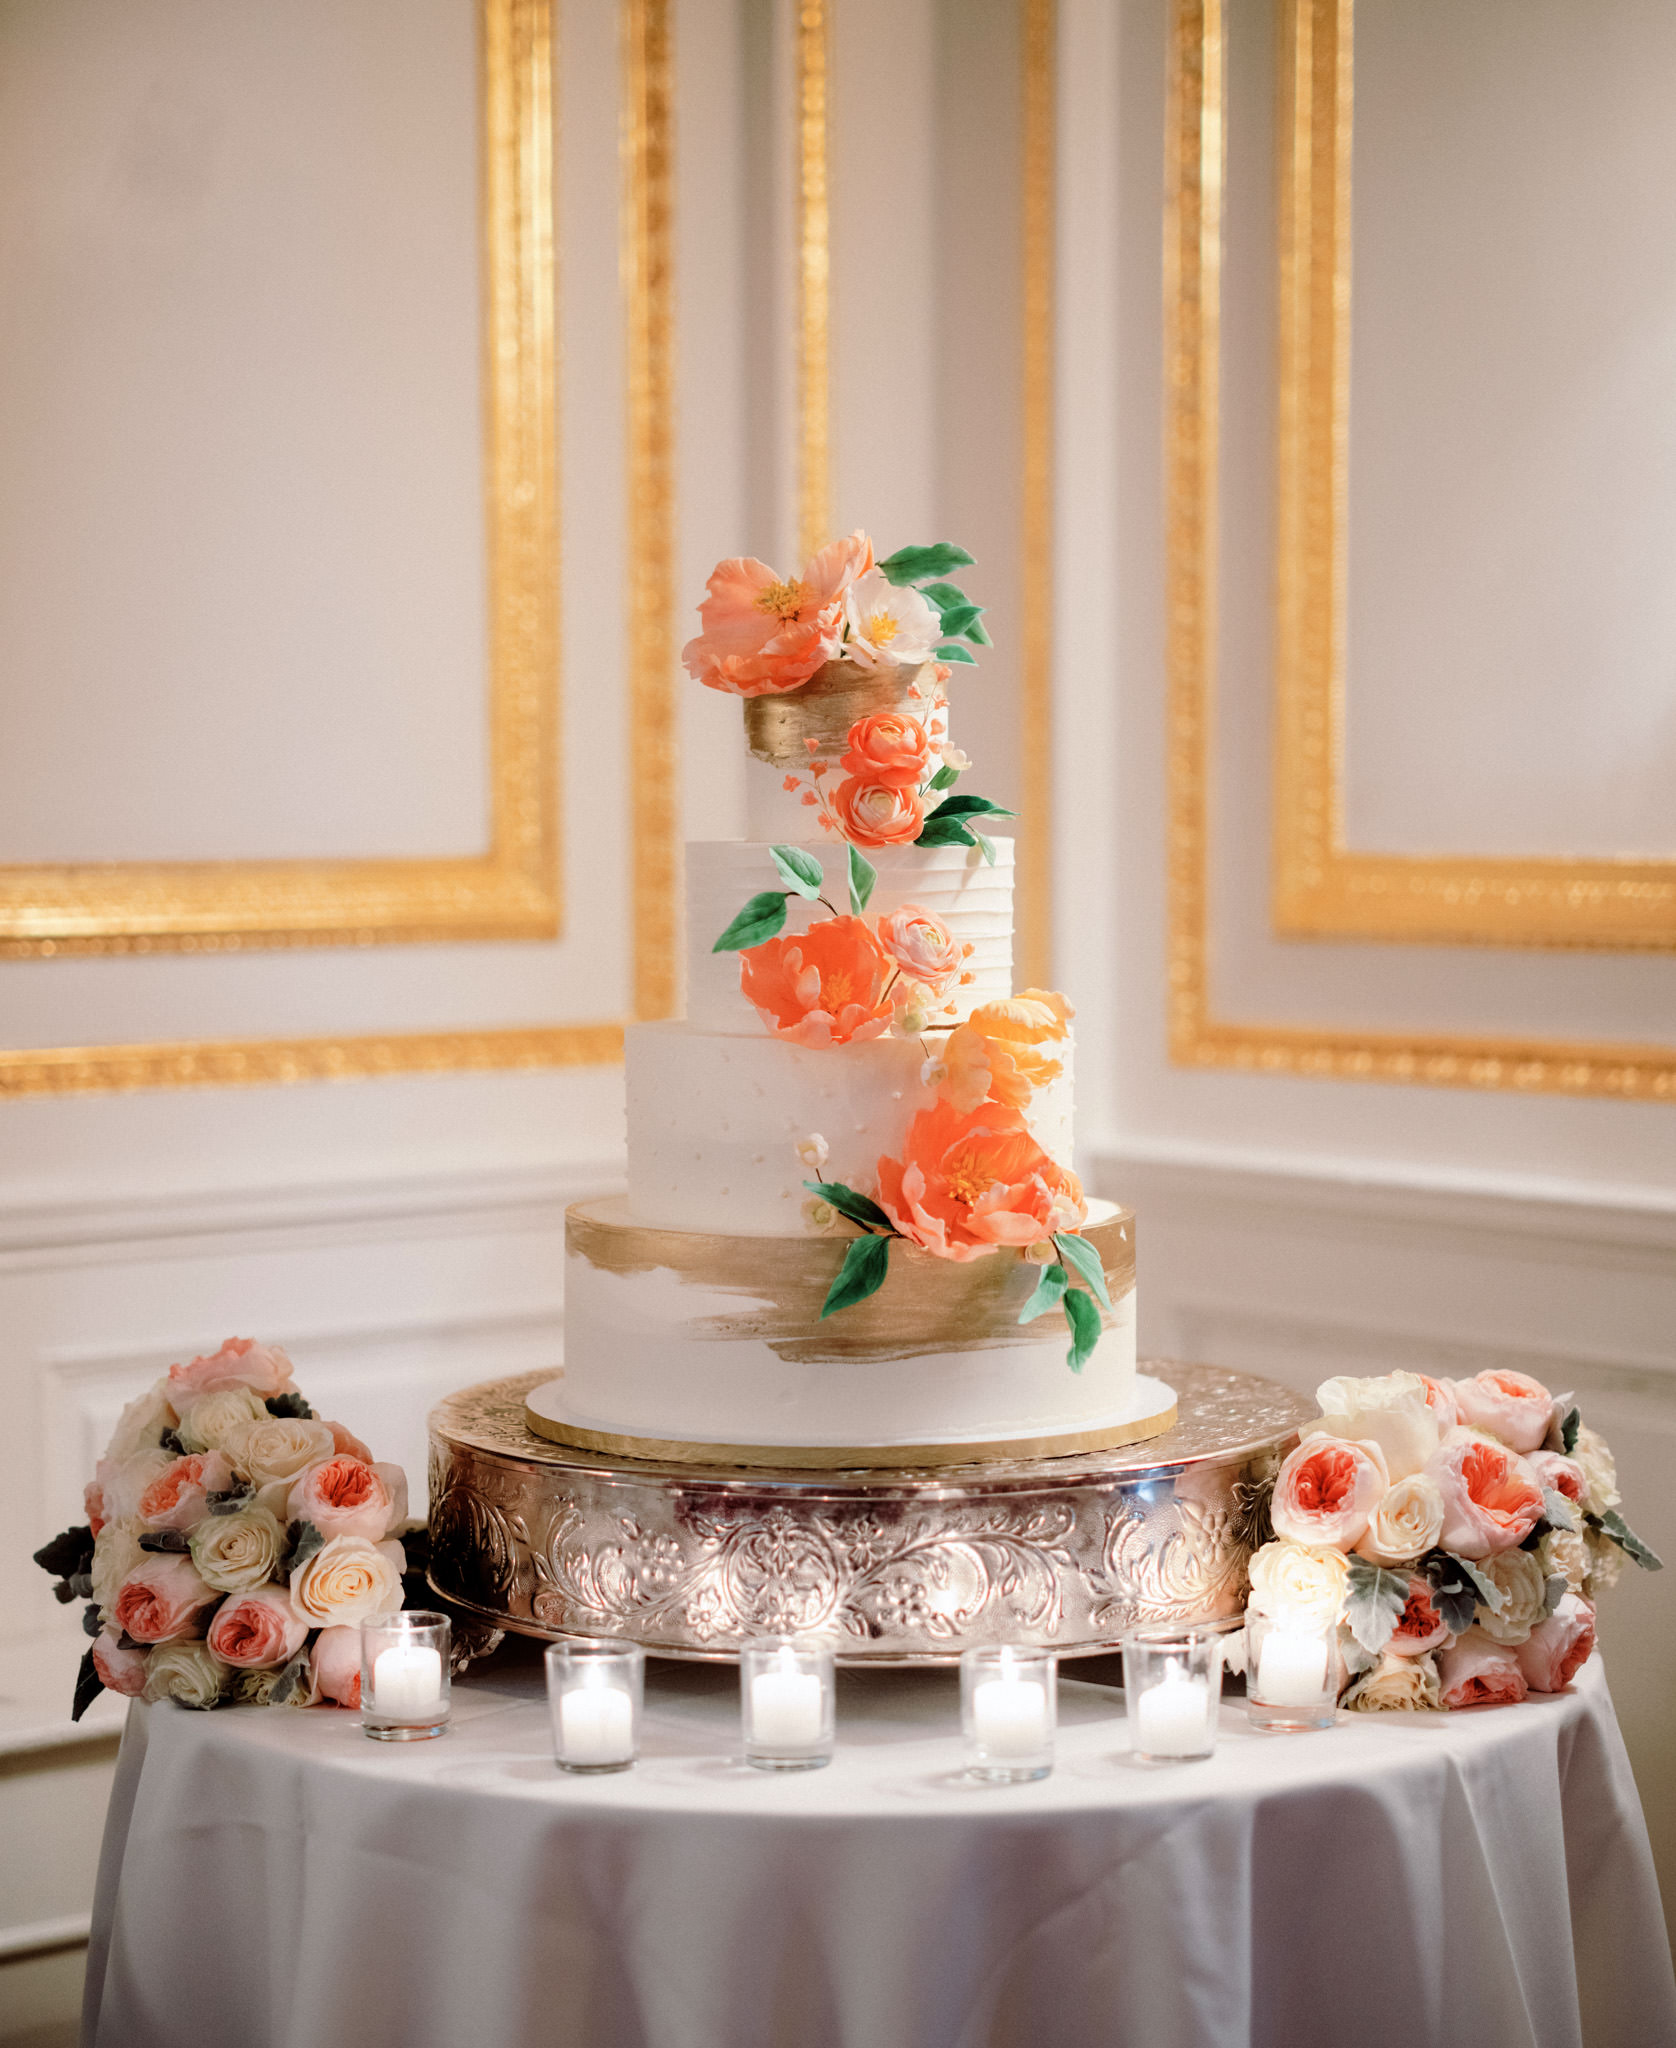 A beautiful, 4-layered, white wedding cake with peach candy flower design. Image by wedding photographer Jenny Fu